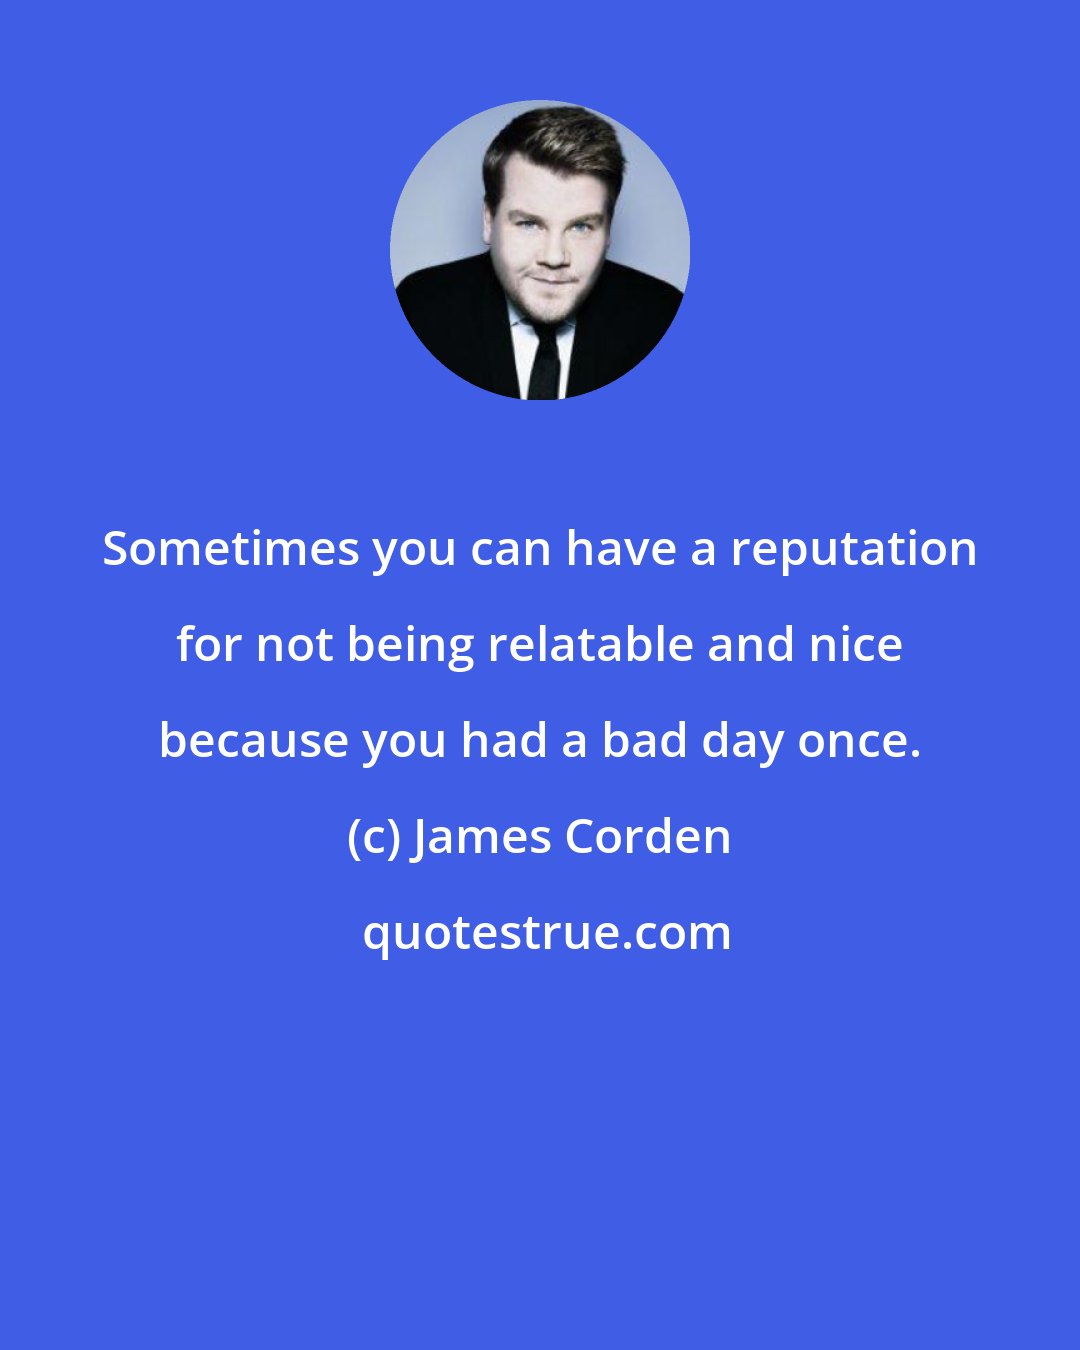 James Corden: Sometimes you can have a reputation for not being relatable and nice because you had a bad day once.